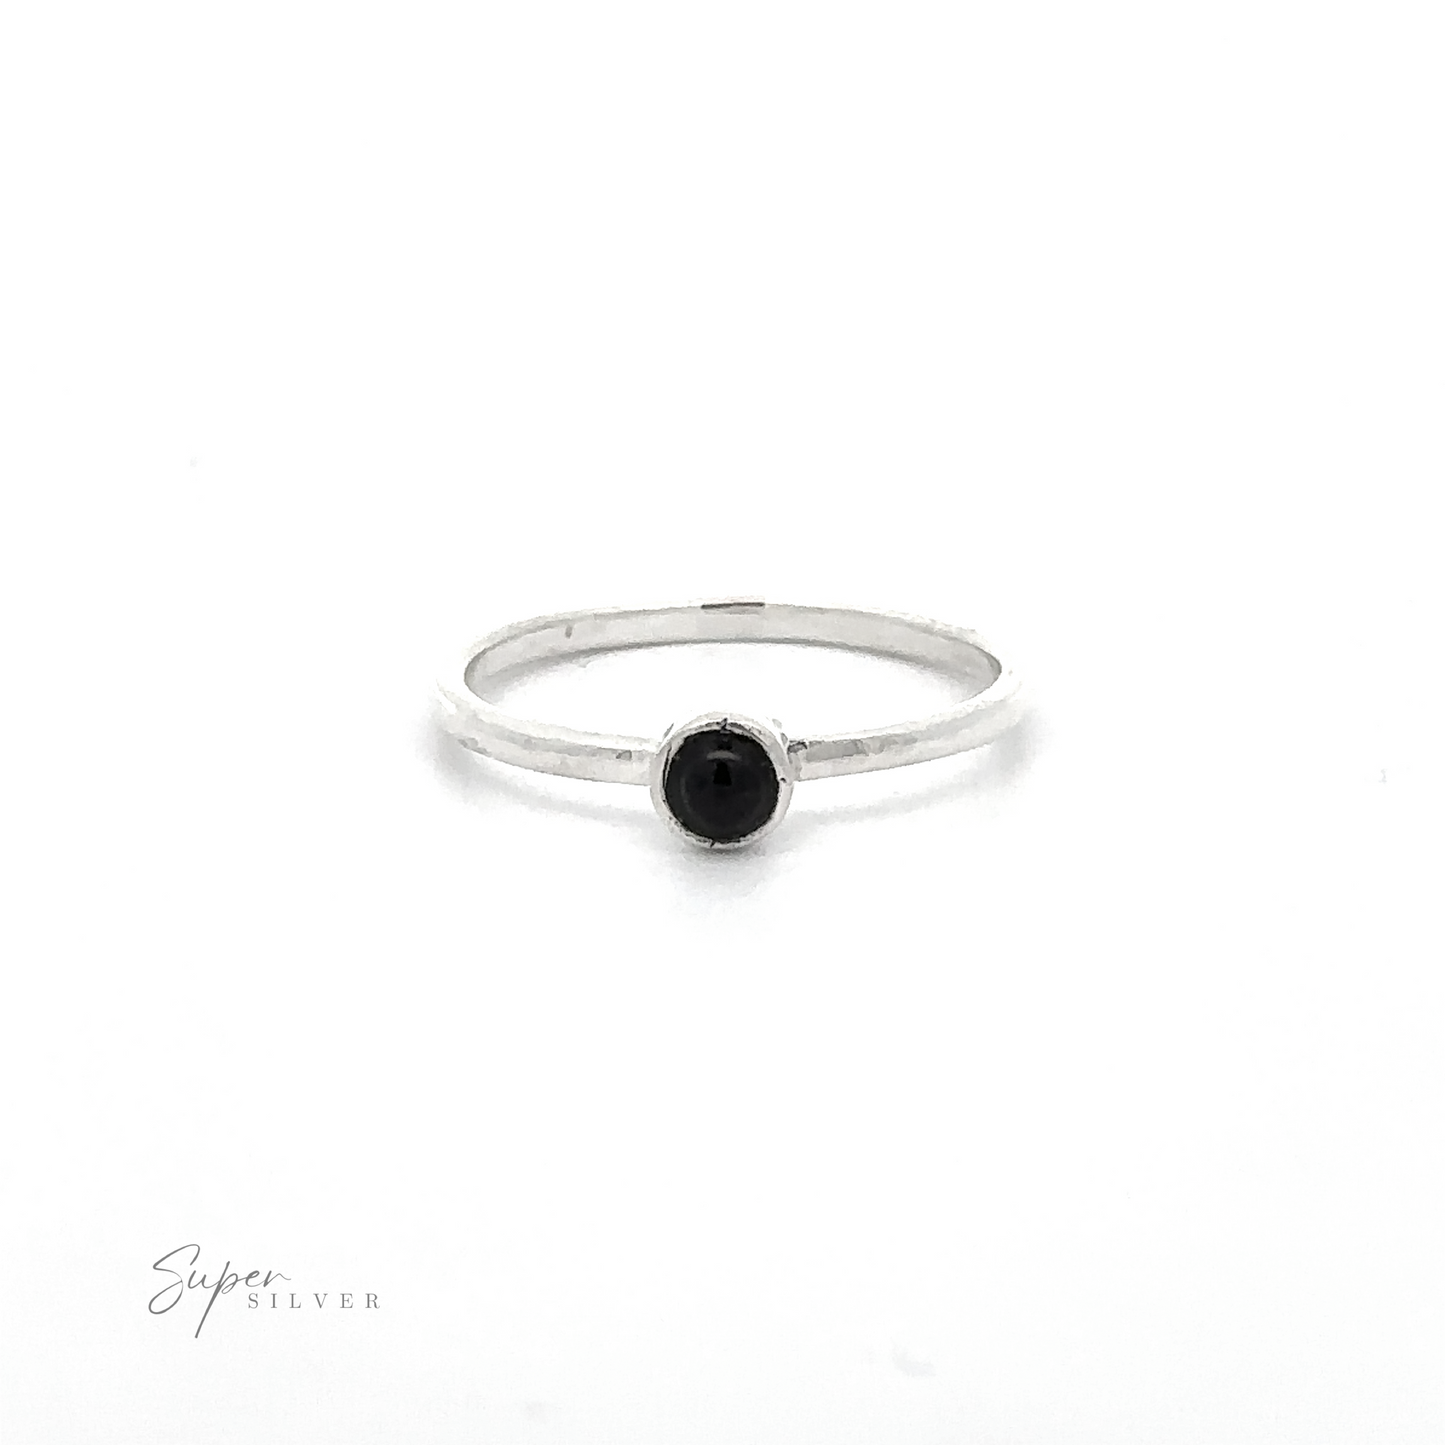 
                  
                    A simple silver ring featuring a small, round black gemstone in its center, perfect for minimalist fashion. The thin band adds to its elegant simplicity. Made of sterling silver, this Dainty Stackable Round Gemstone Ring has "Super Silver" visible in the bottom left corner.
                  
                